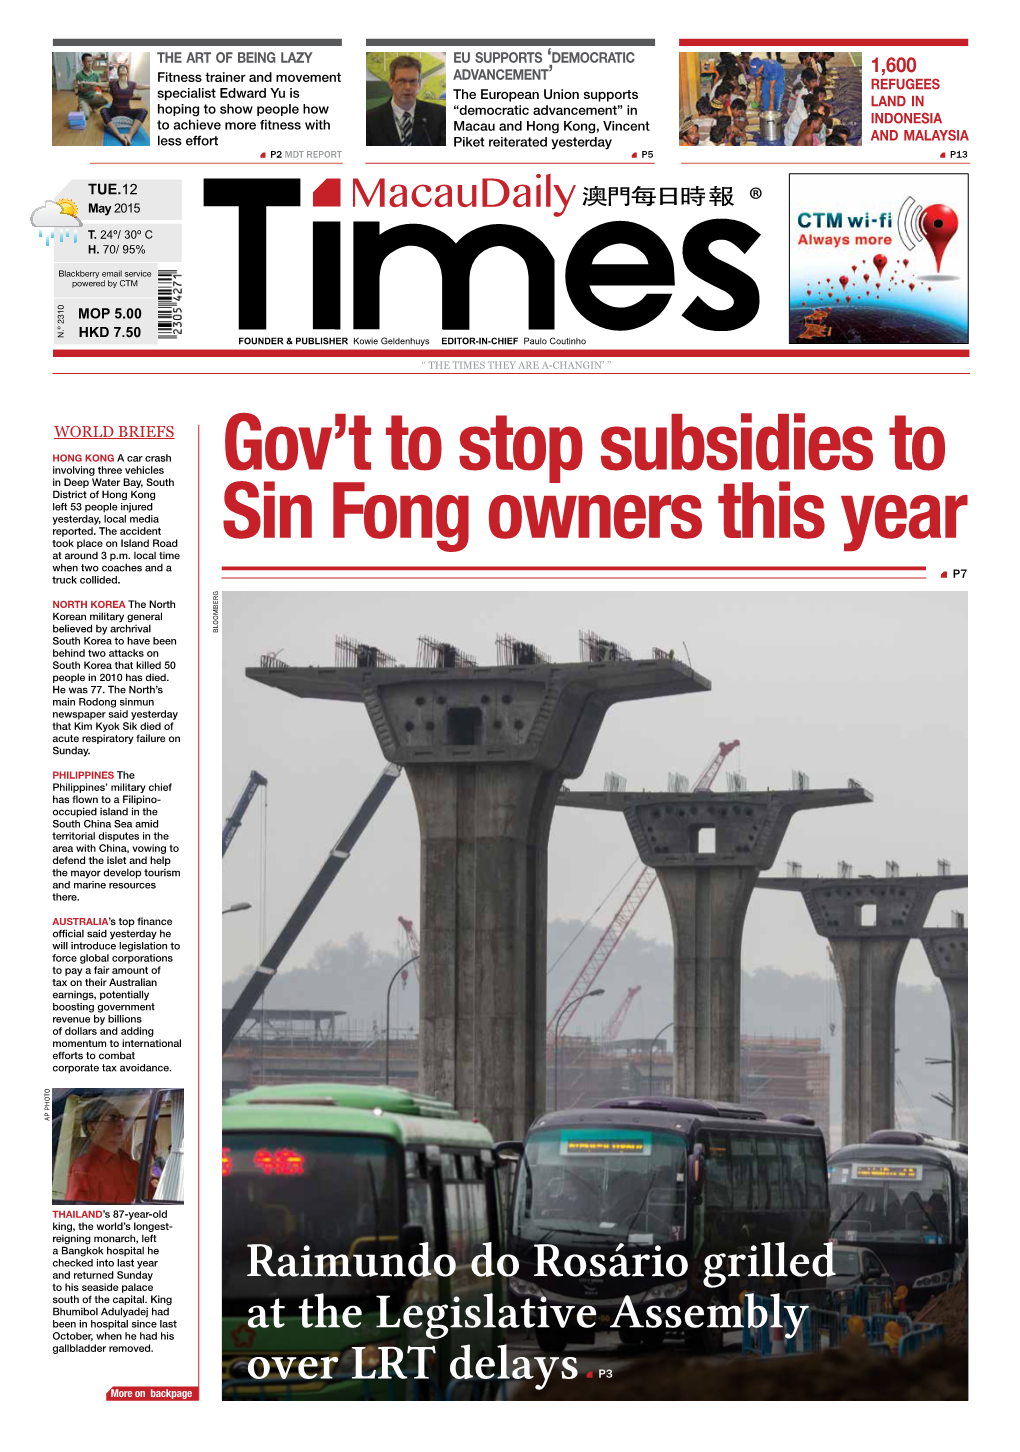 Gov't to Stop Subsidies to Sin Fong Owners This Year